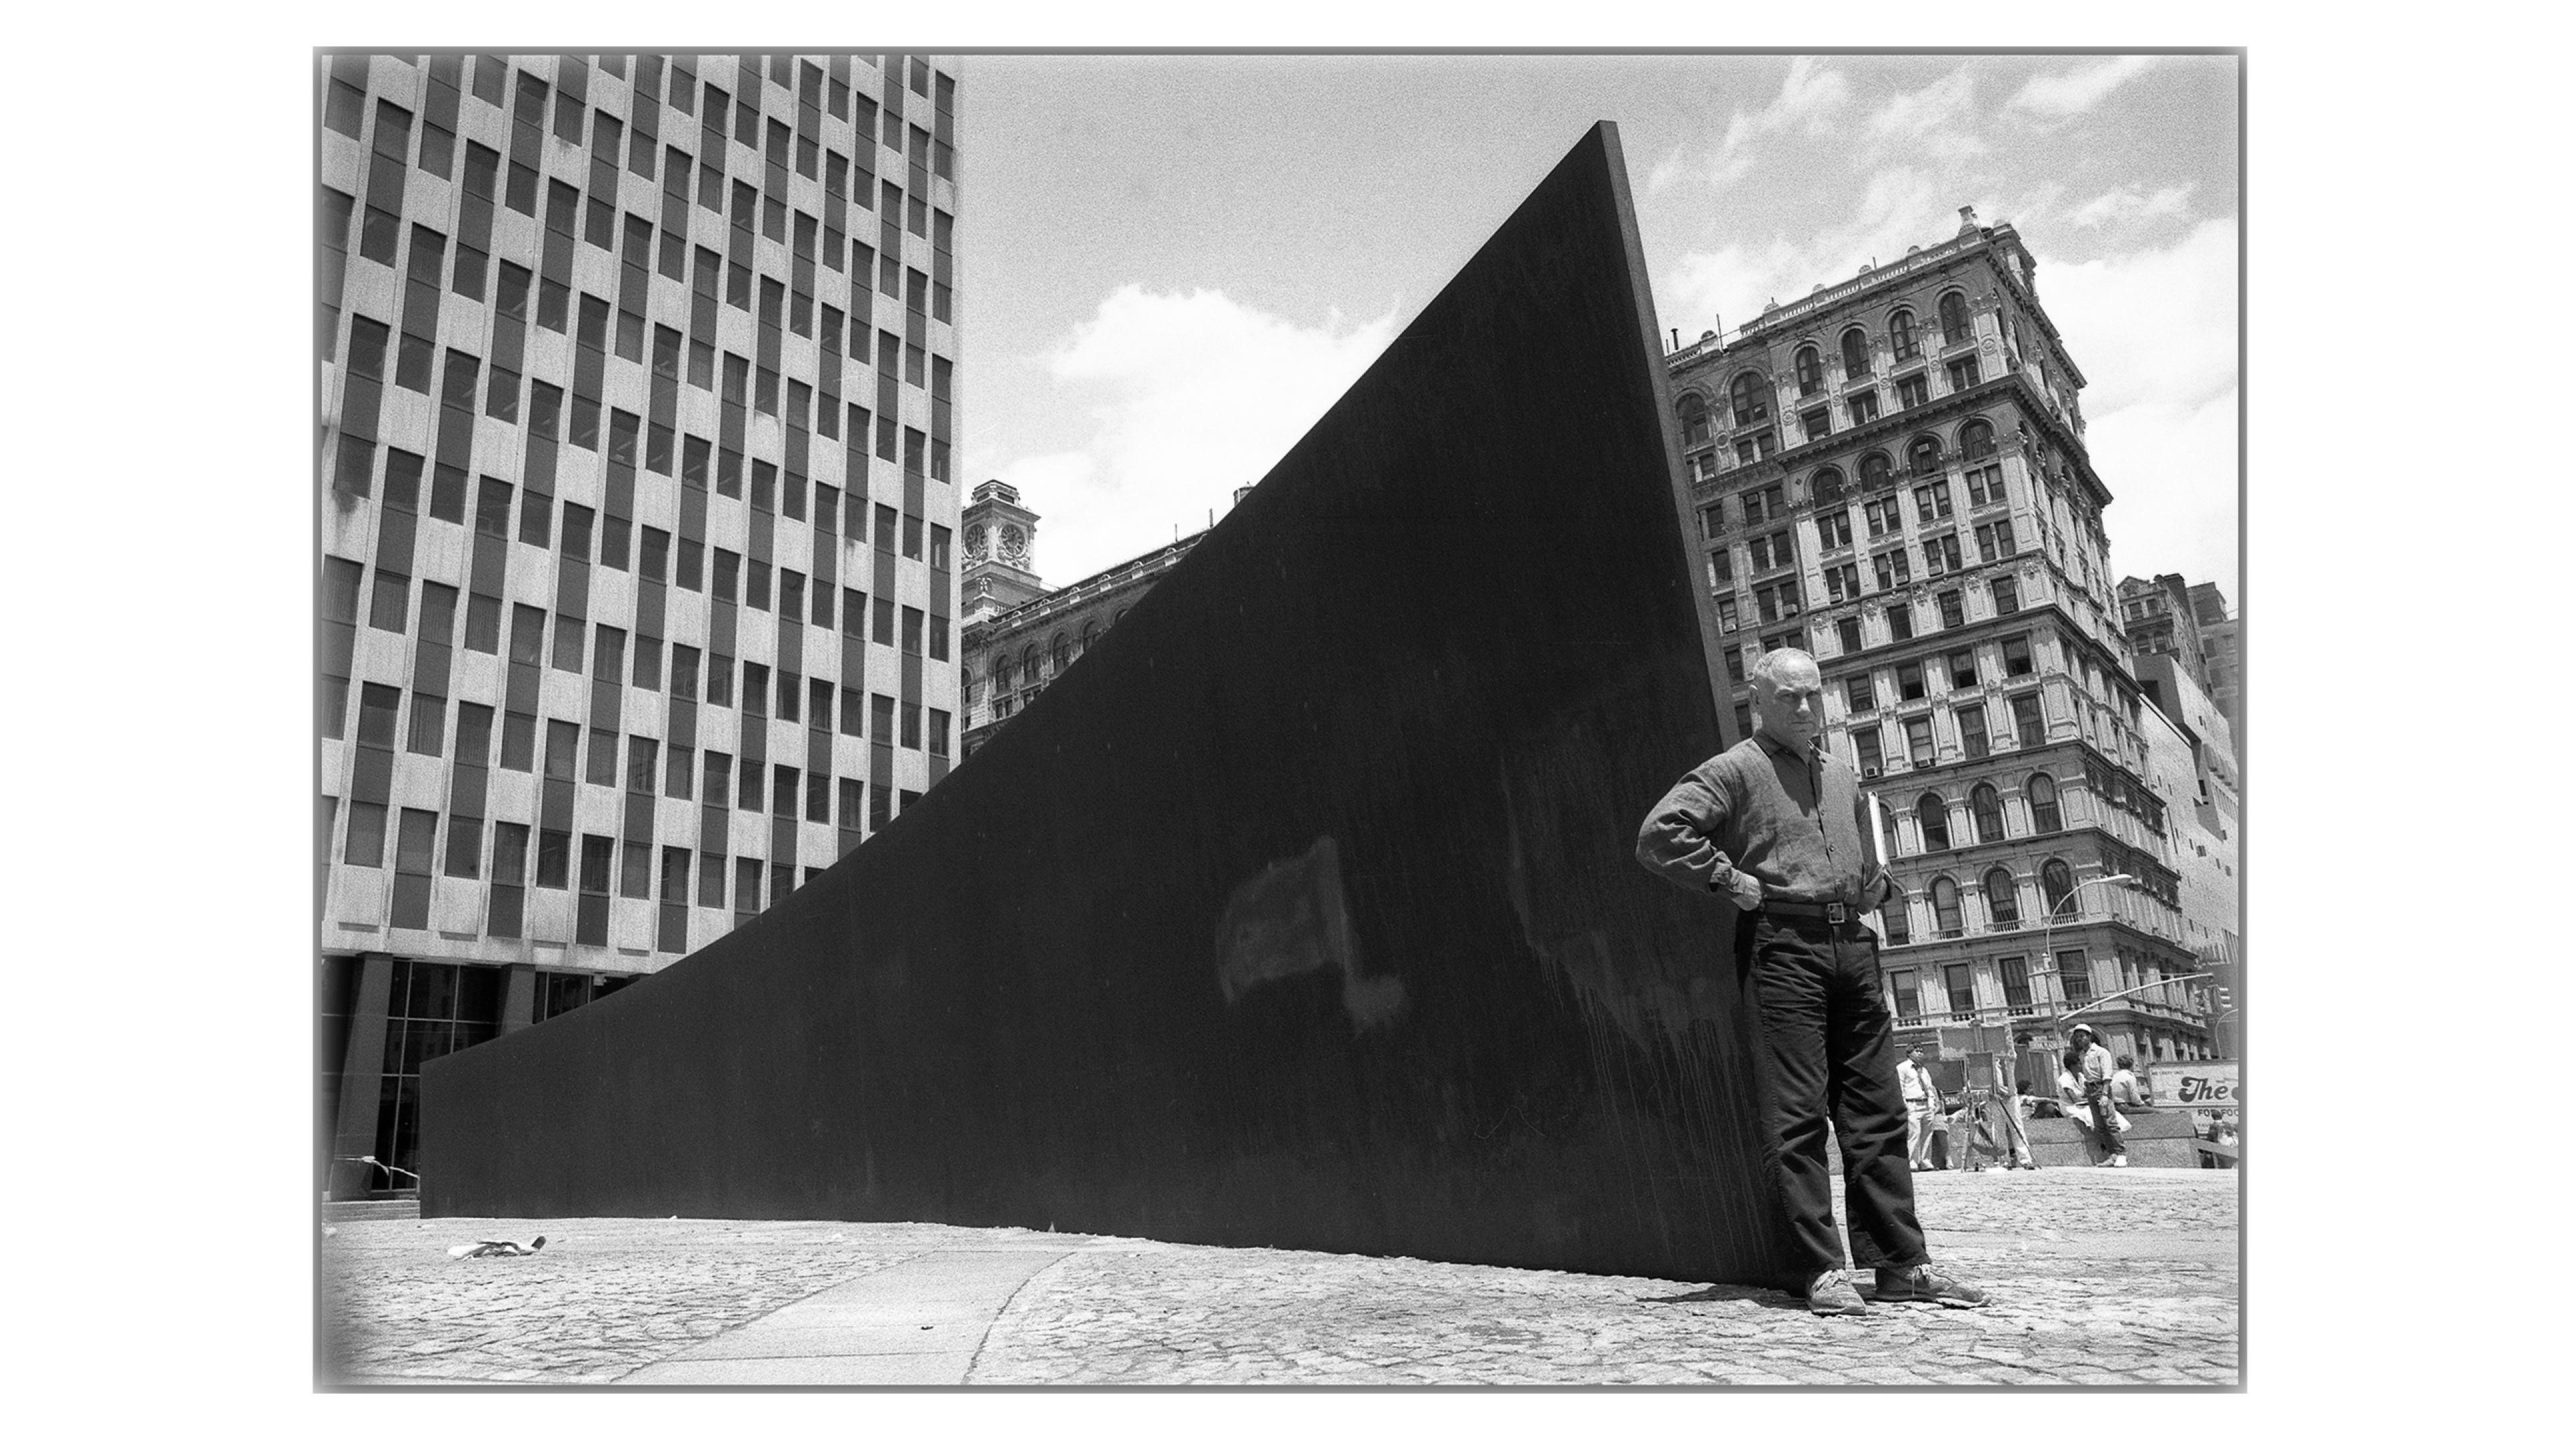 Sculptor Richard Serra, renowned ‘poet of iron’ is dead at 85